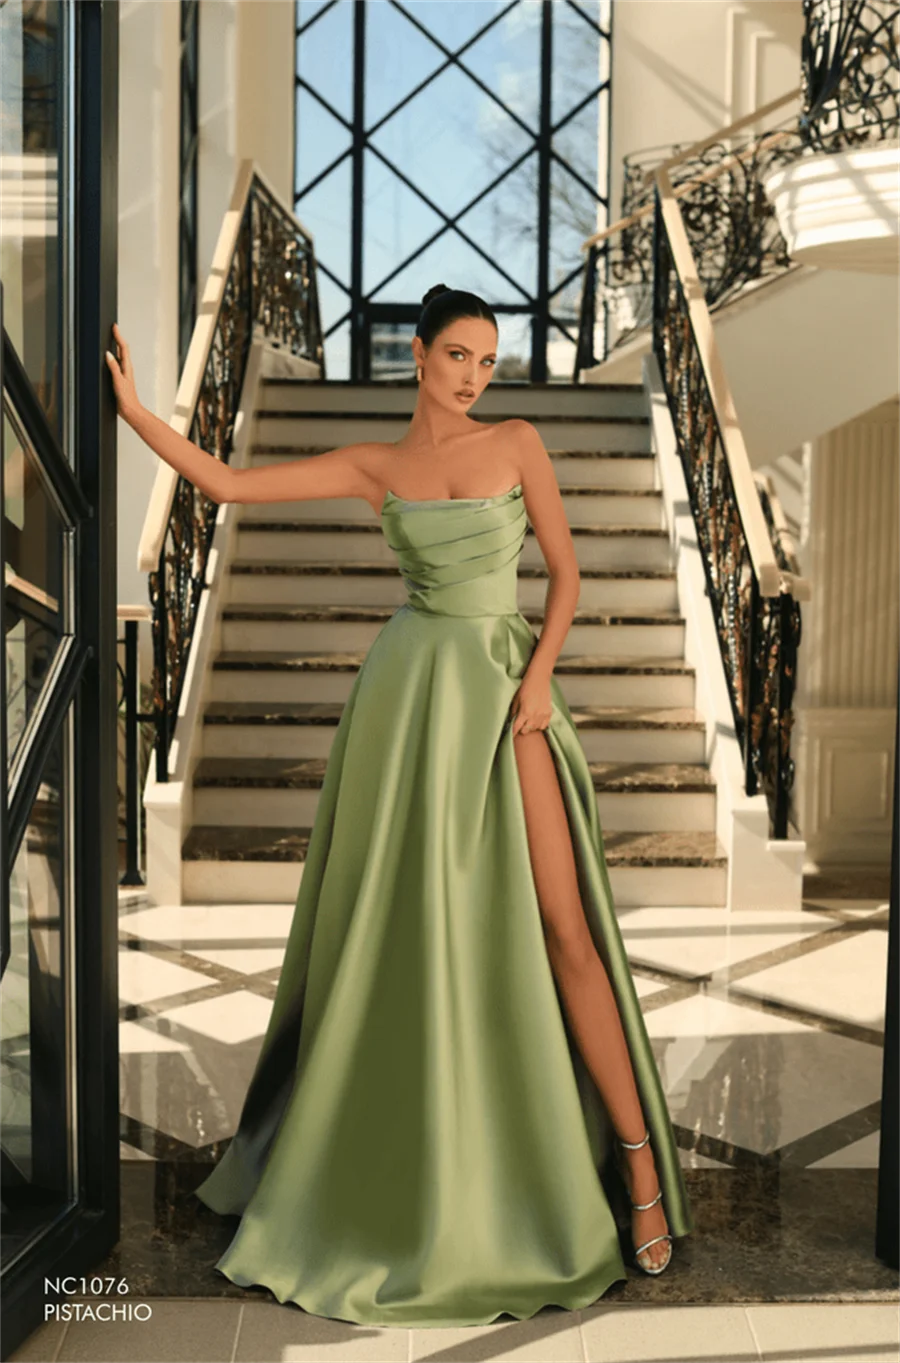 

2023 Simple Satin Sleeveless Evening Gown Luxurious Sweetheart Slit Prom Dress Elegant Plus Size Women Formal Occasion Dresses